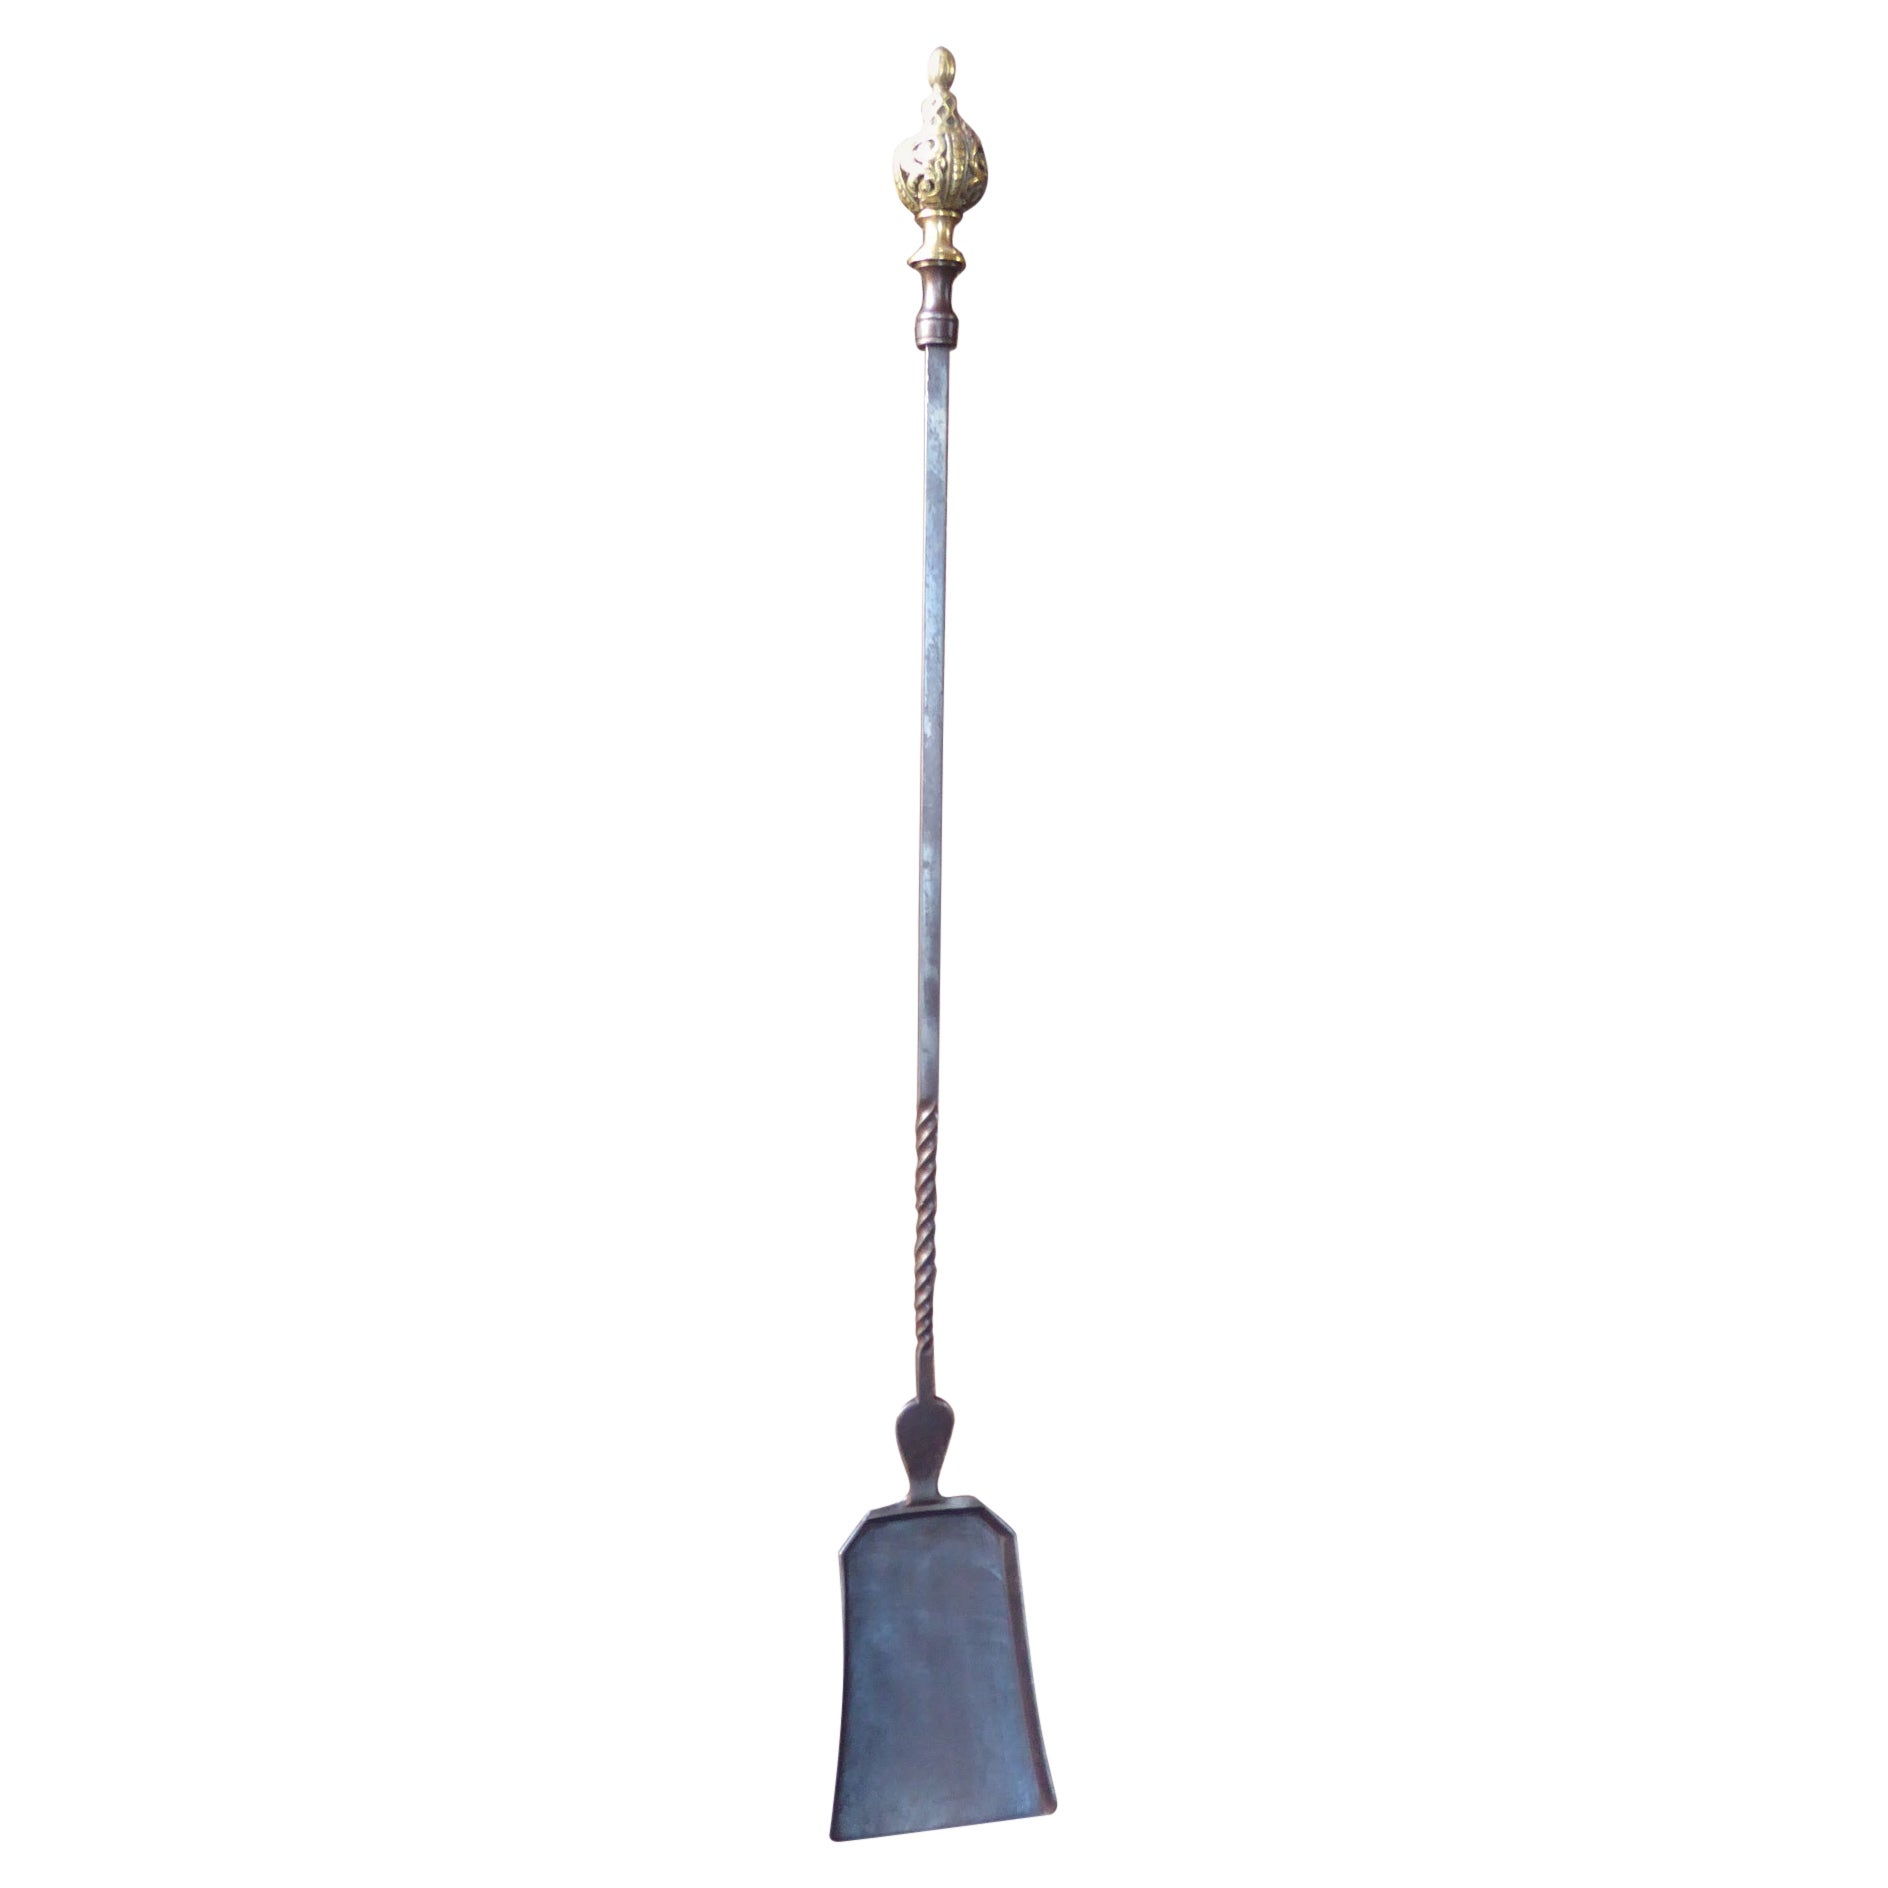 18th - 19th Century French Fireplace Shovel or Fire Shovel For Sale